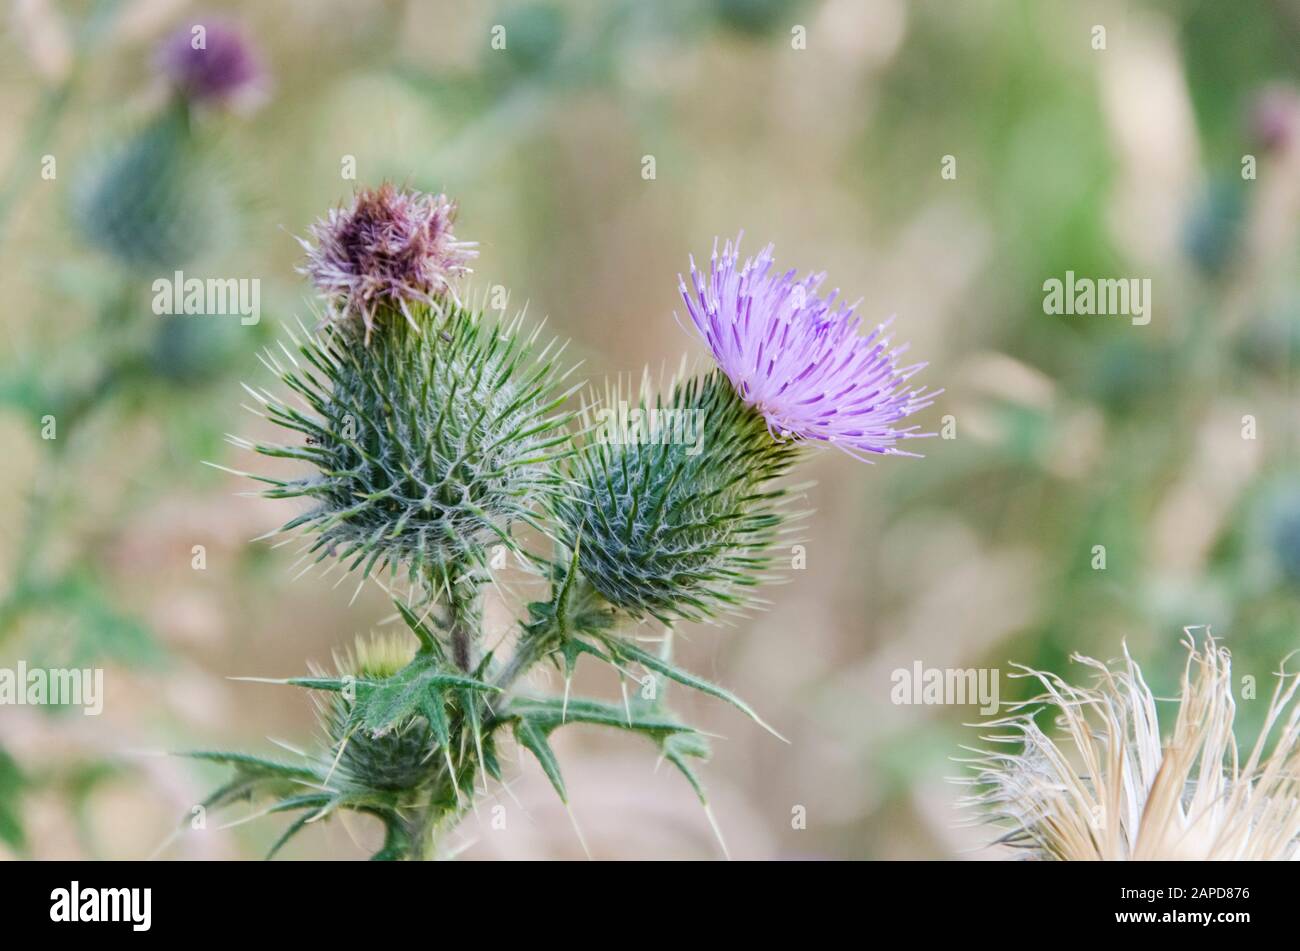 Thistle in bloom, Carduus pycnocephalus, also known as Italian thistle, Italian plumeless thistle and Plymouth thistle, in the Bosque Energético, Ener Stock Photo